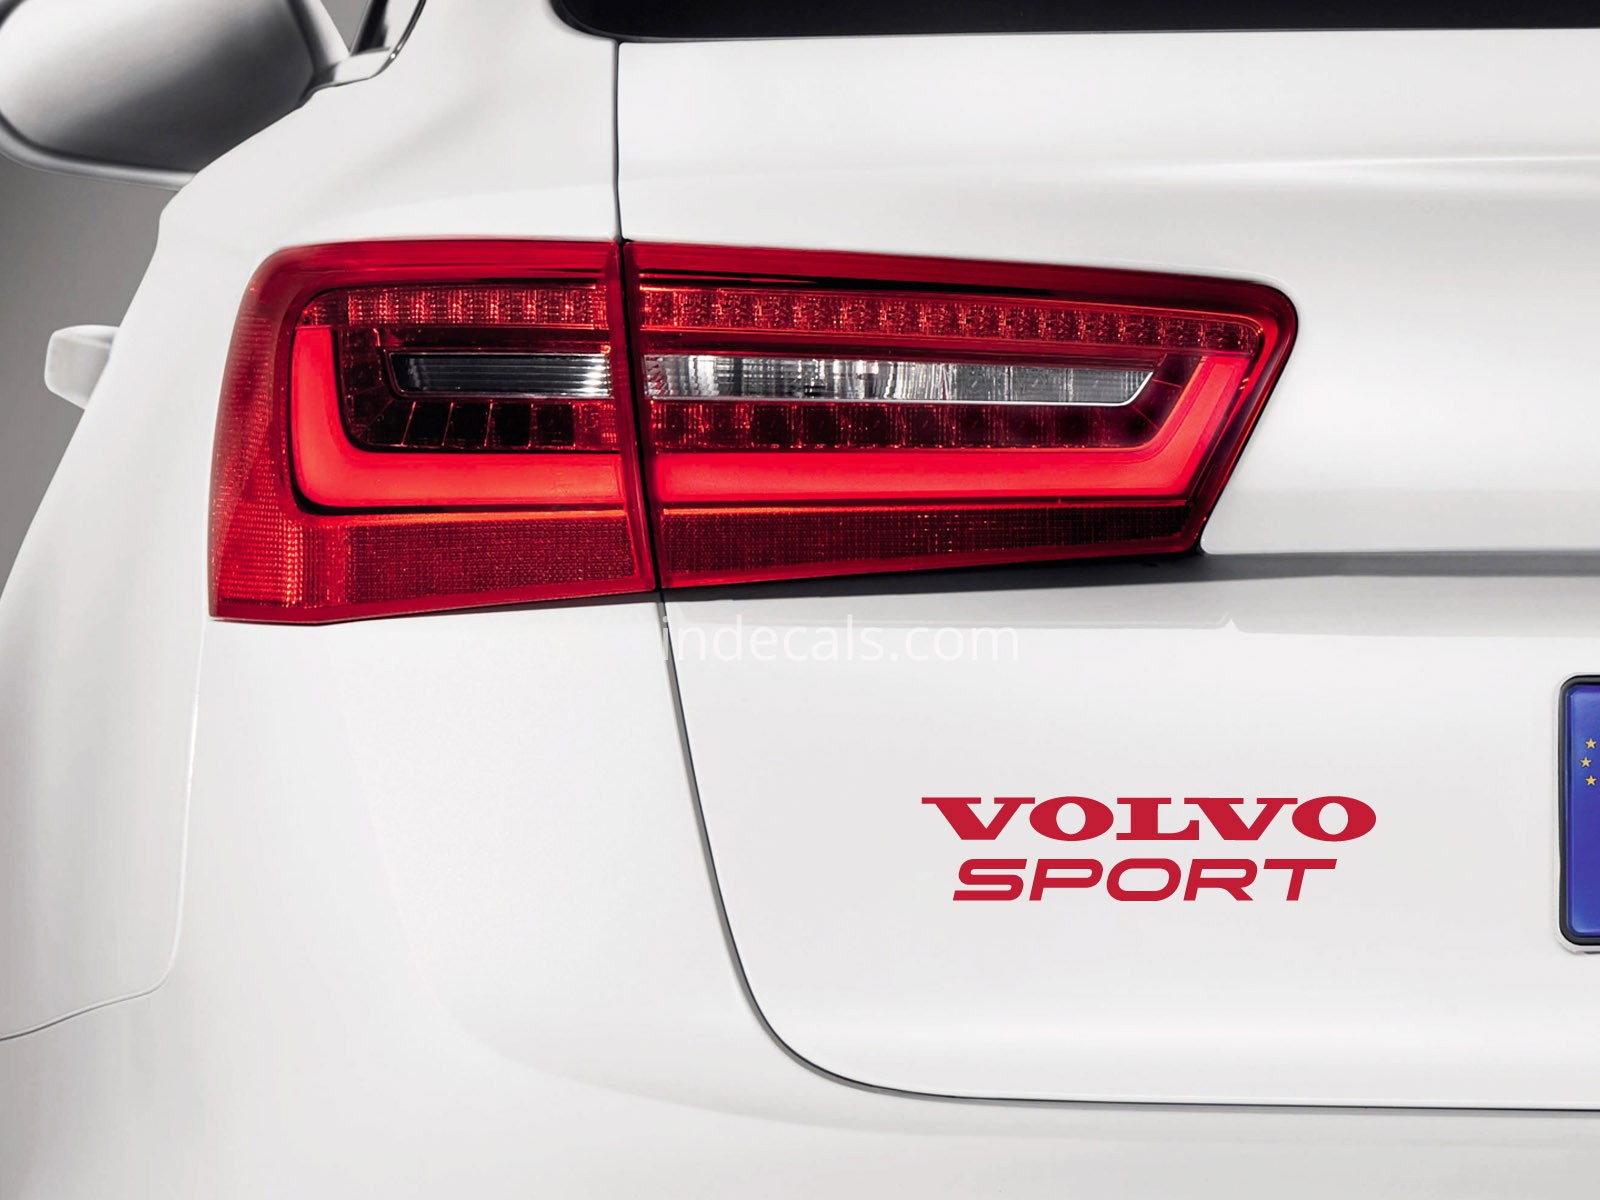 1 x Volvo Sports Sticker for Trunk - Red